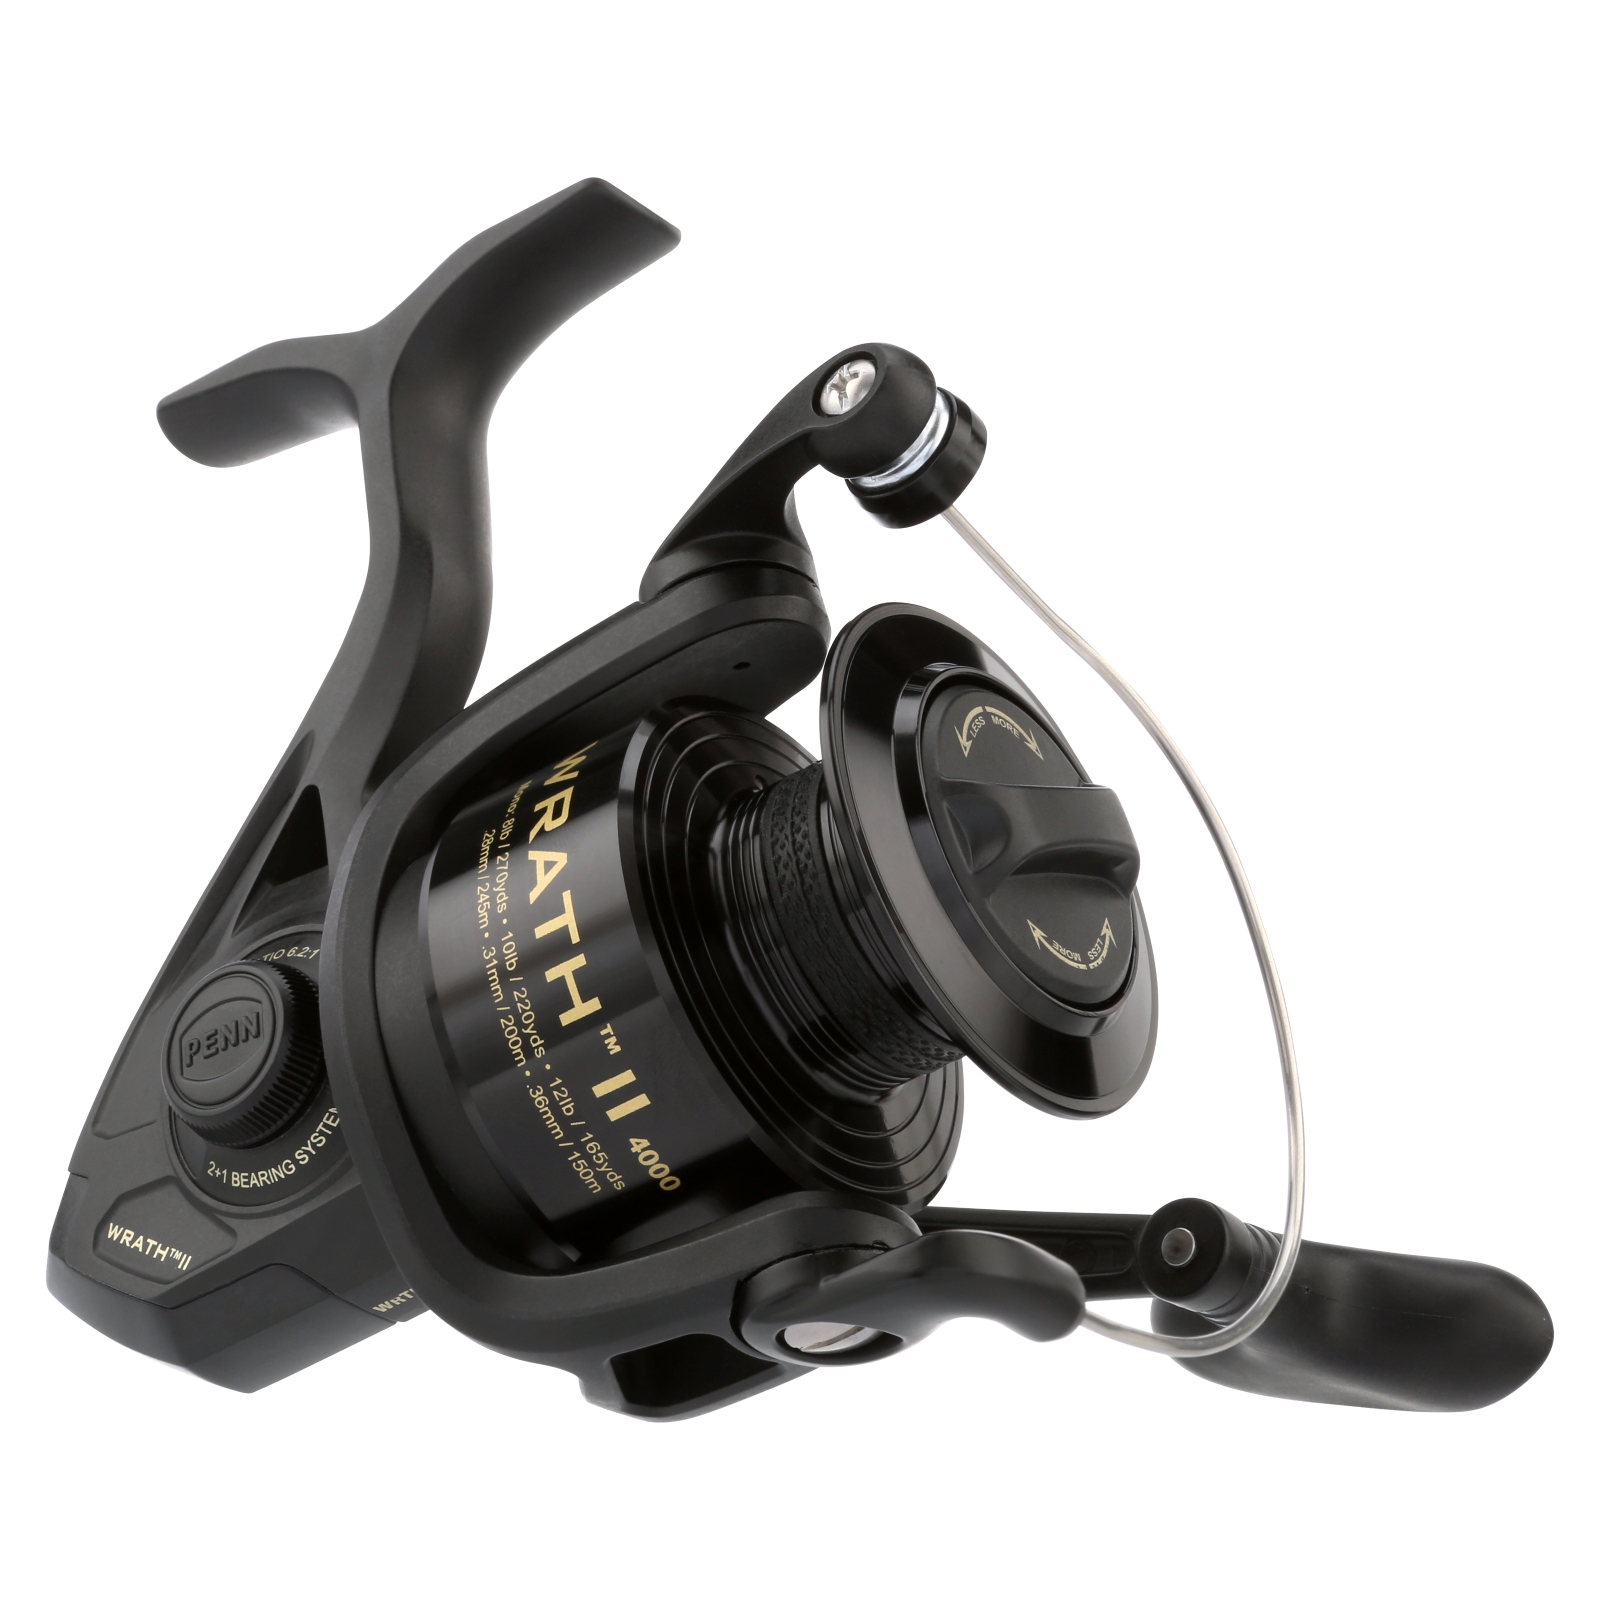 NEW PENN Wrath II Reel and Combo – Affordable Option, General Discussions